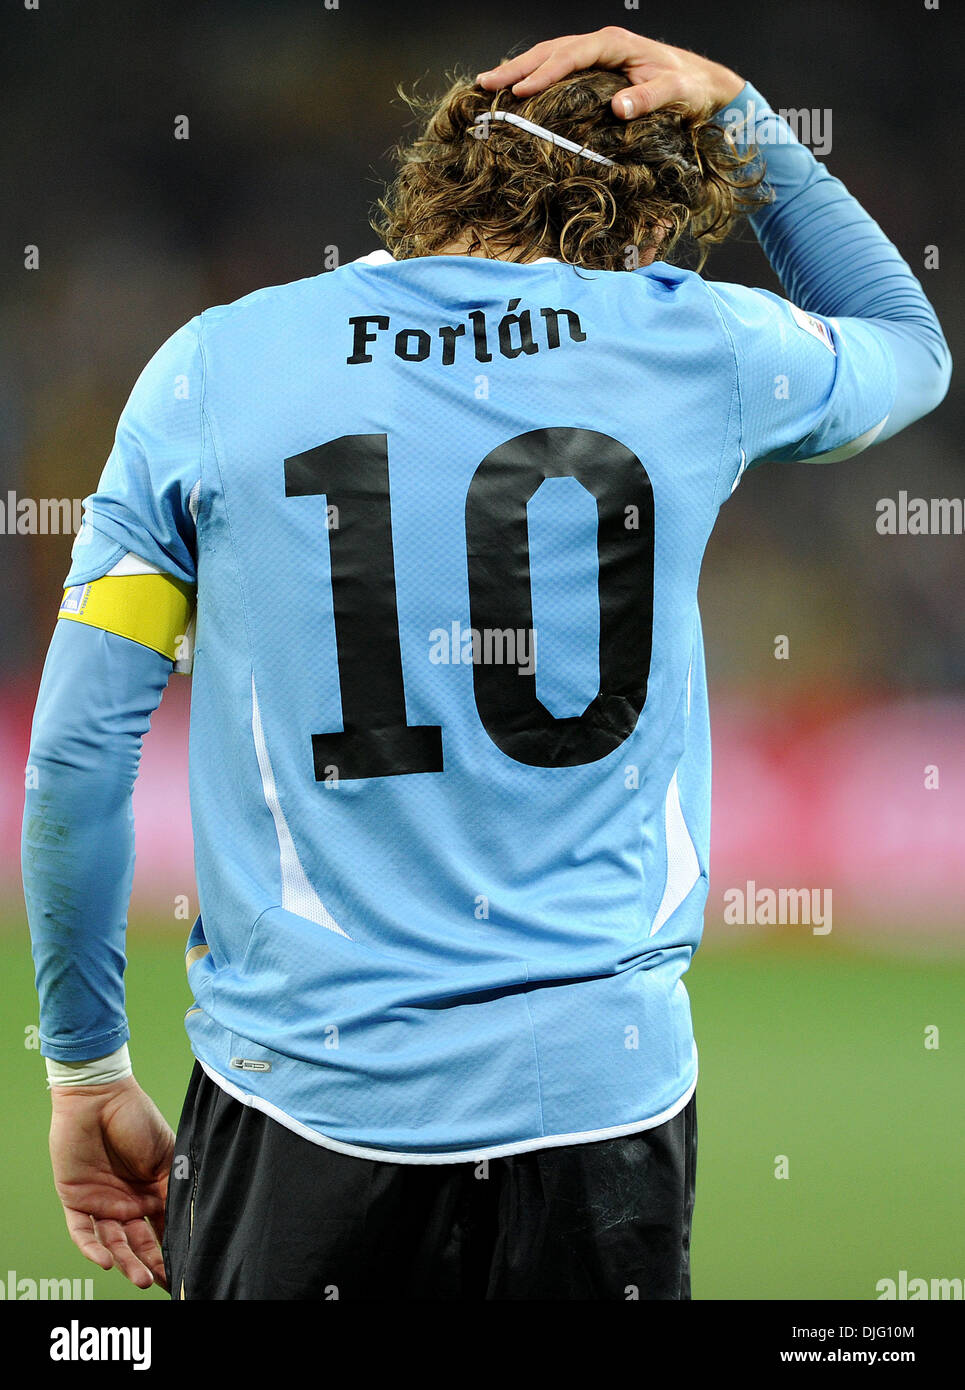 diego forlan jersey number